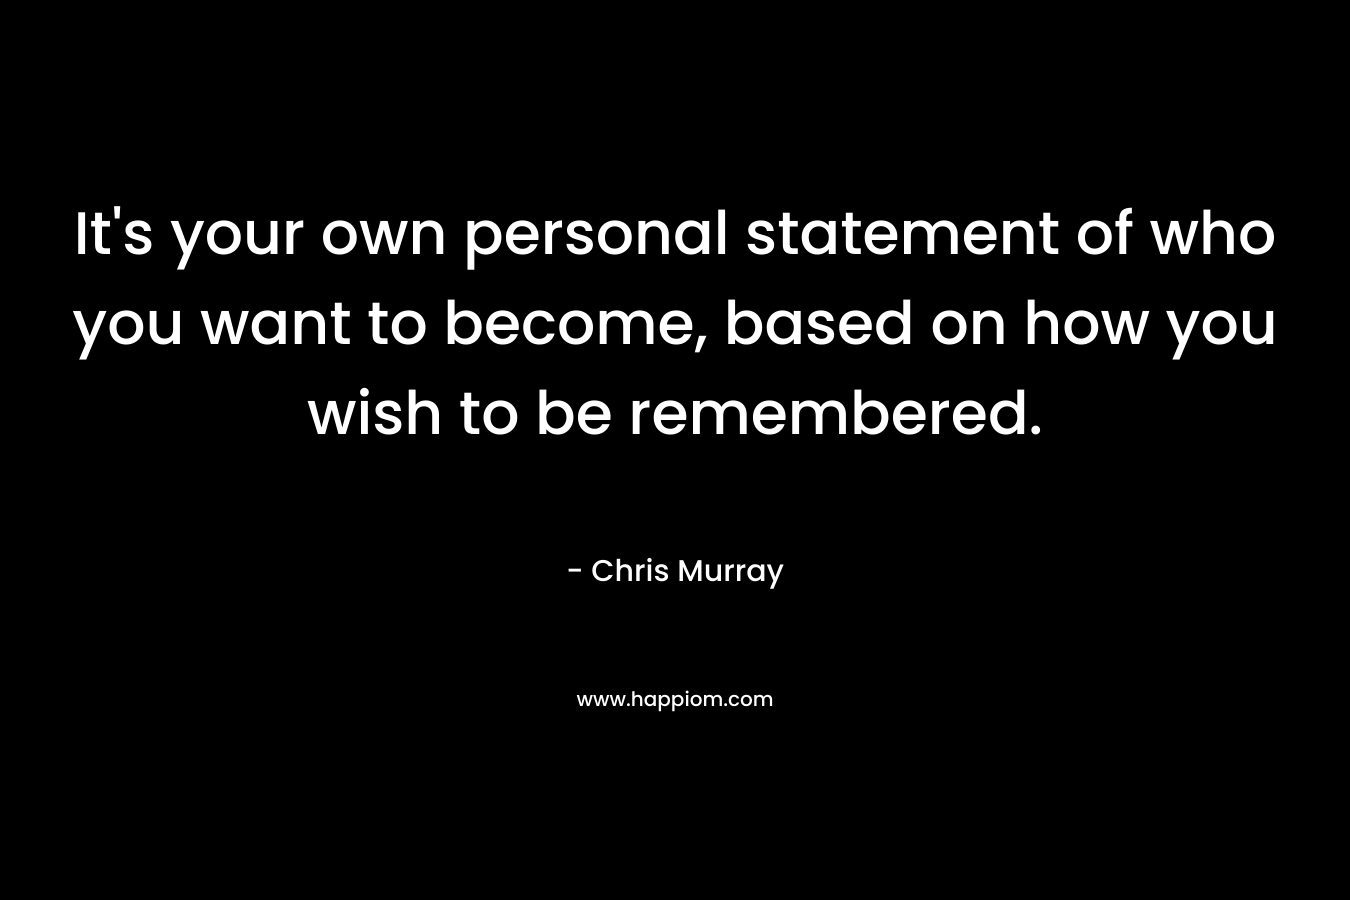 It's your own personal statement of who you want to become, based on how you wish to be remembered.